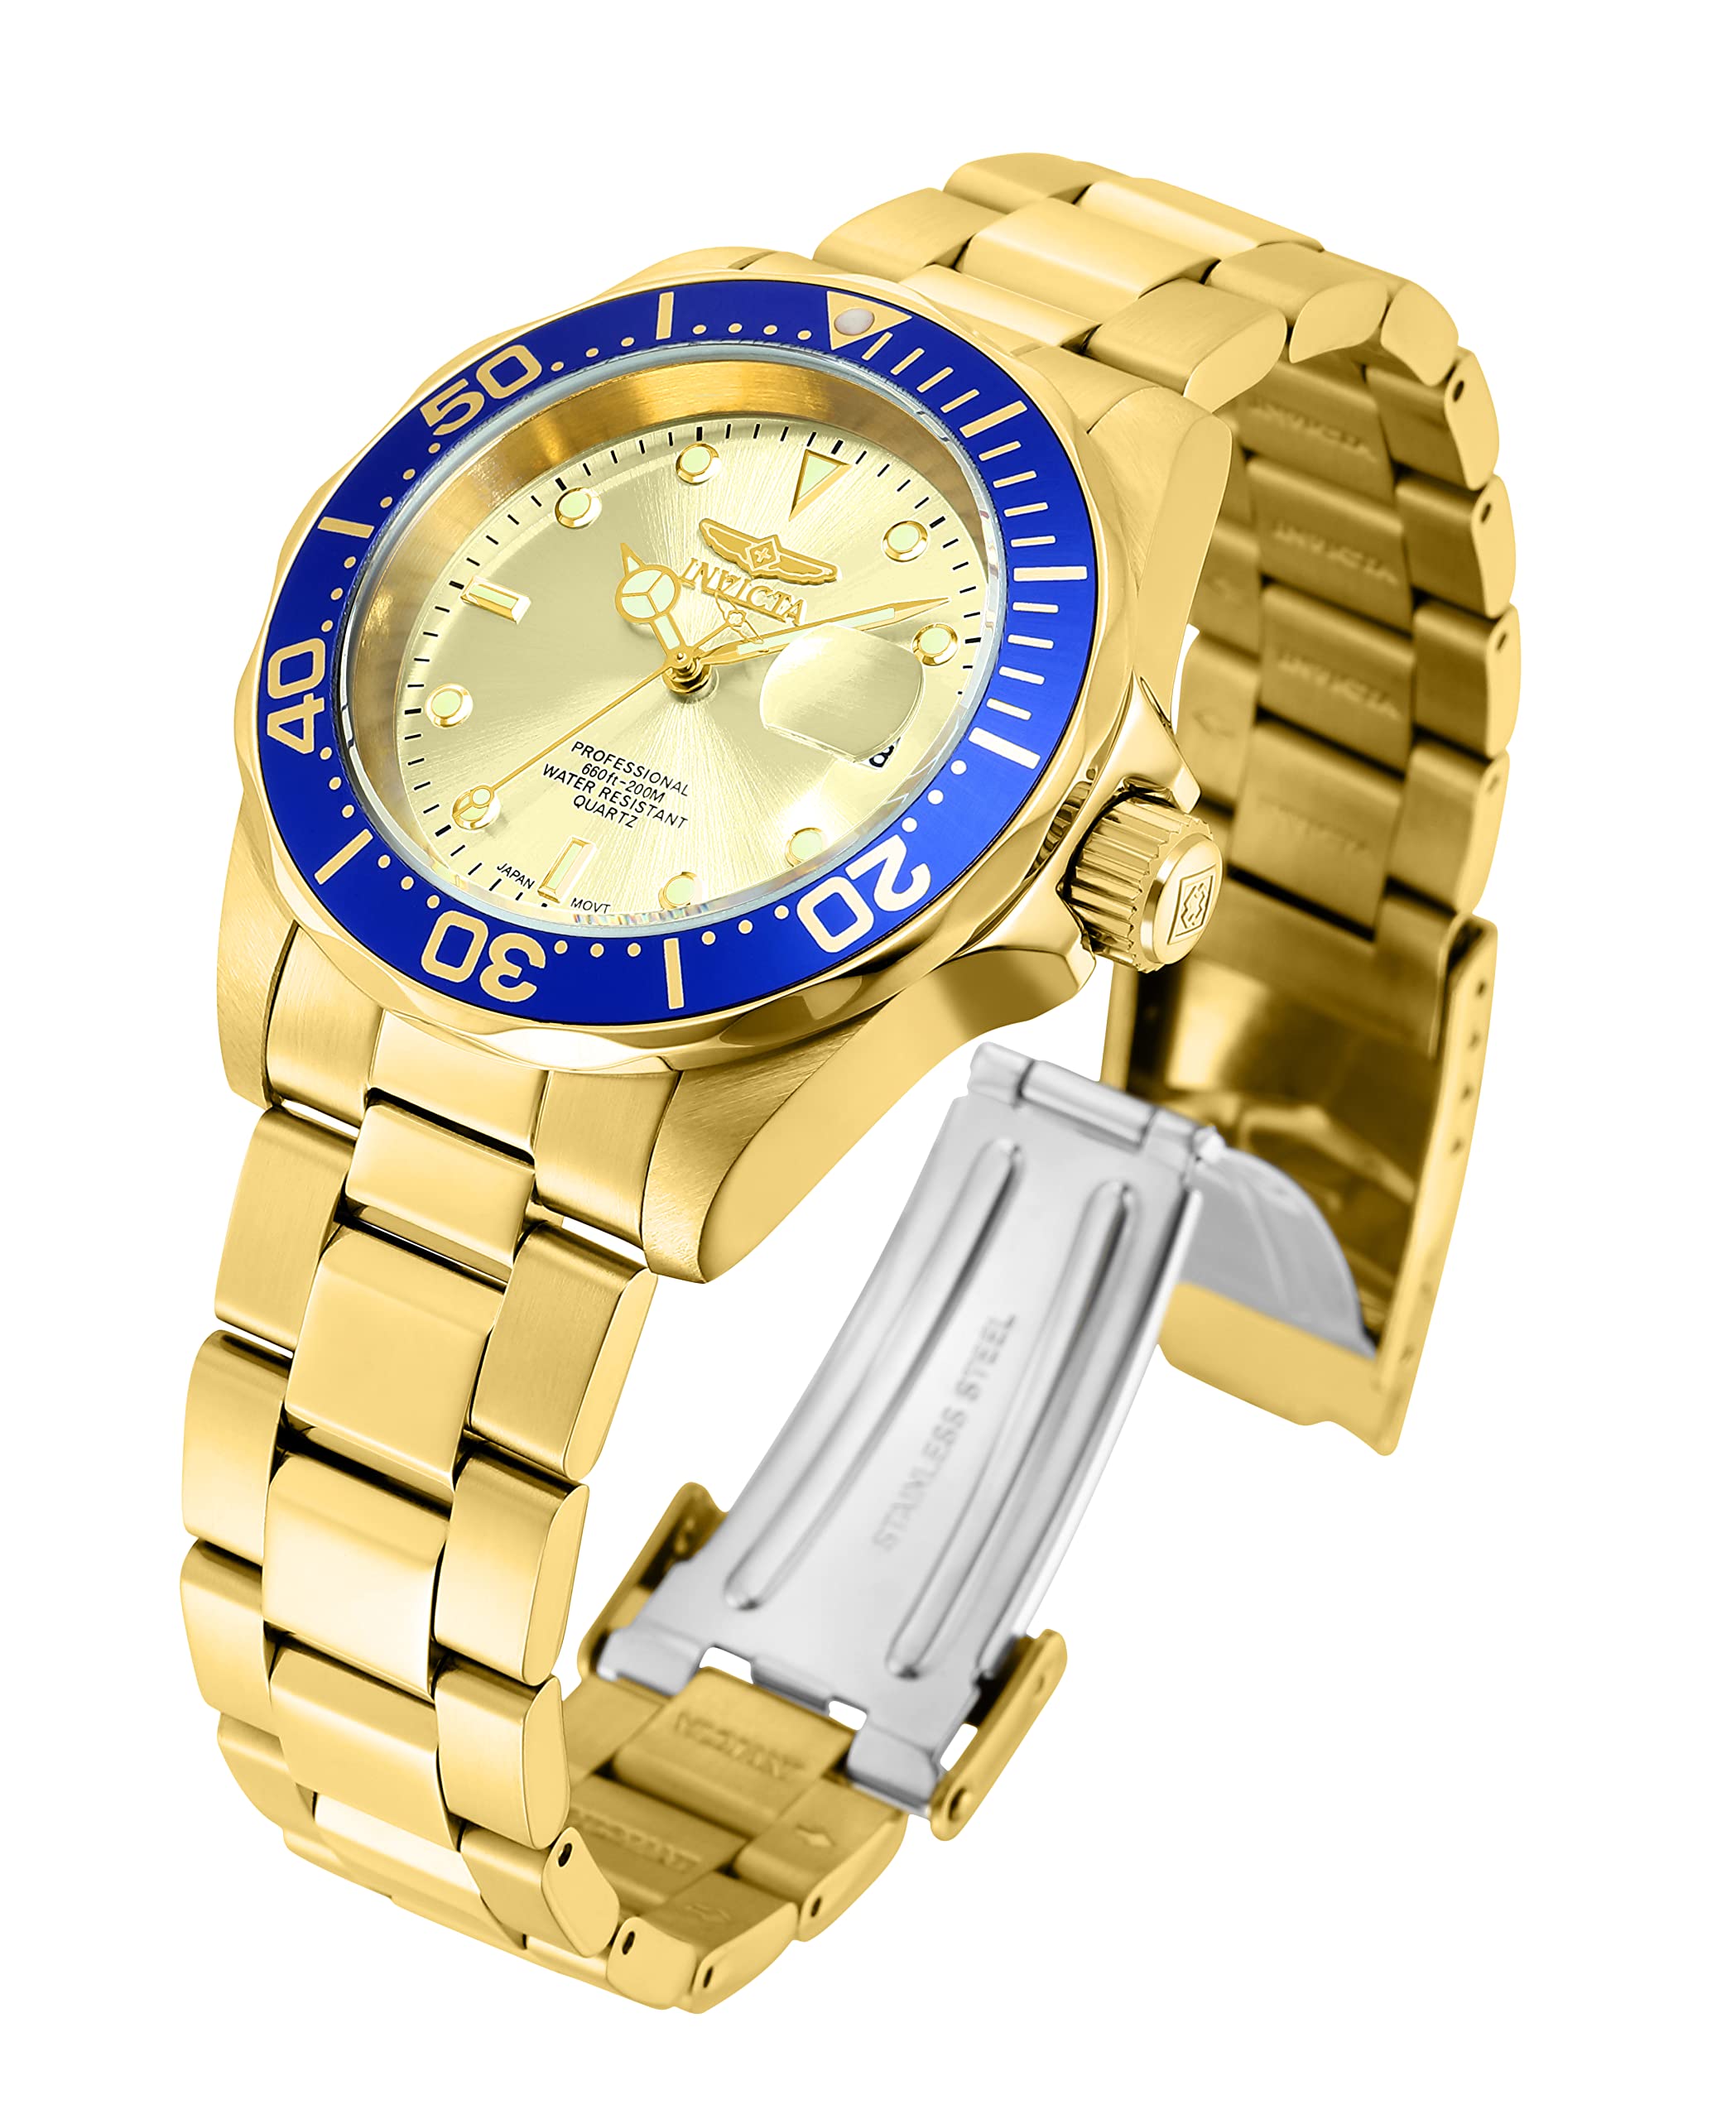 Invicta Men's 14124 Pro Diver Gold Dial 18k Gold Ion-Plated Stainless Steel Watch